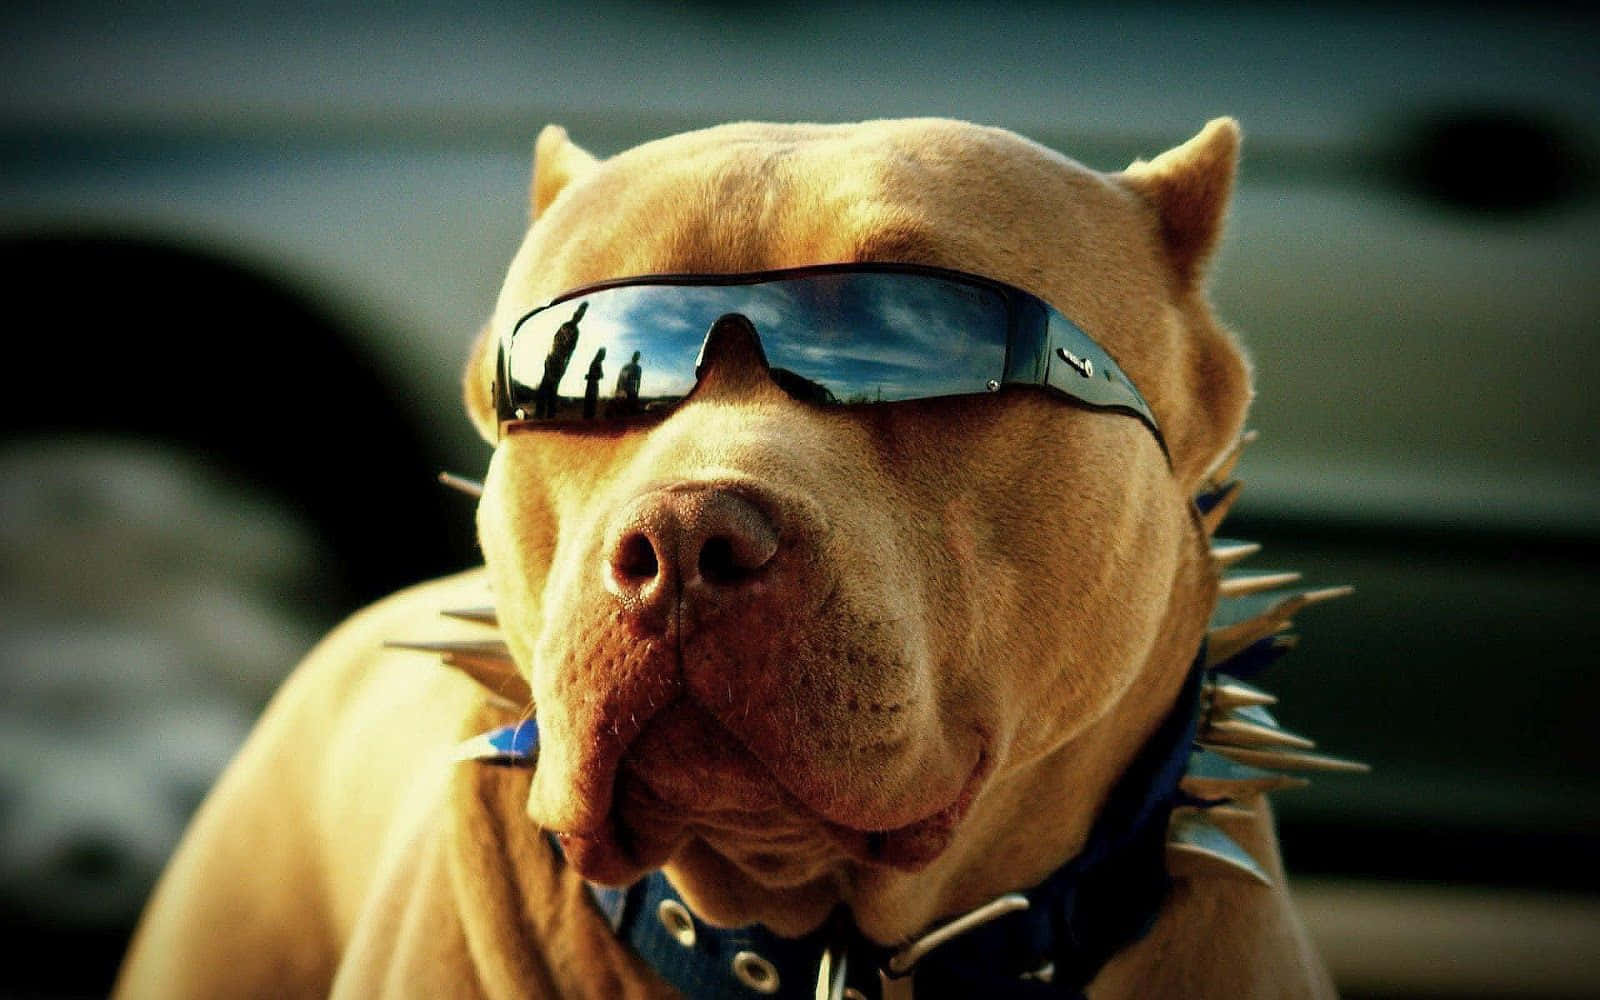 This Pup Is Looking 'cool' With His Shades. Wallpaper